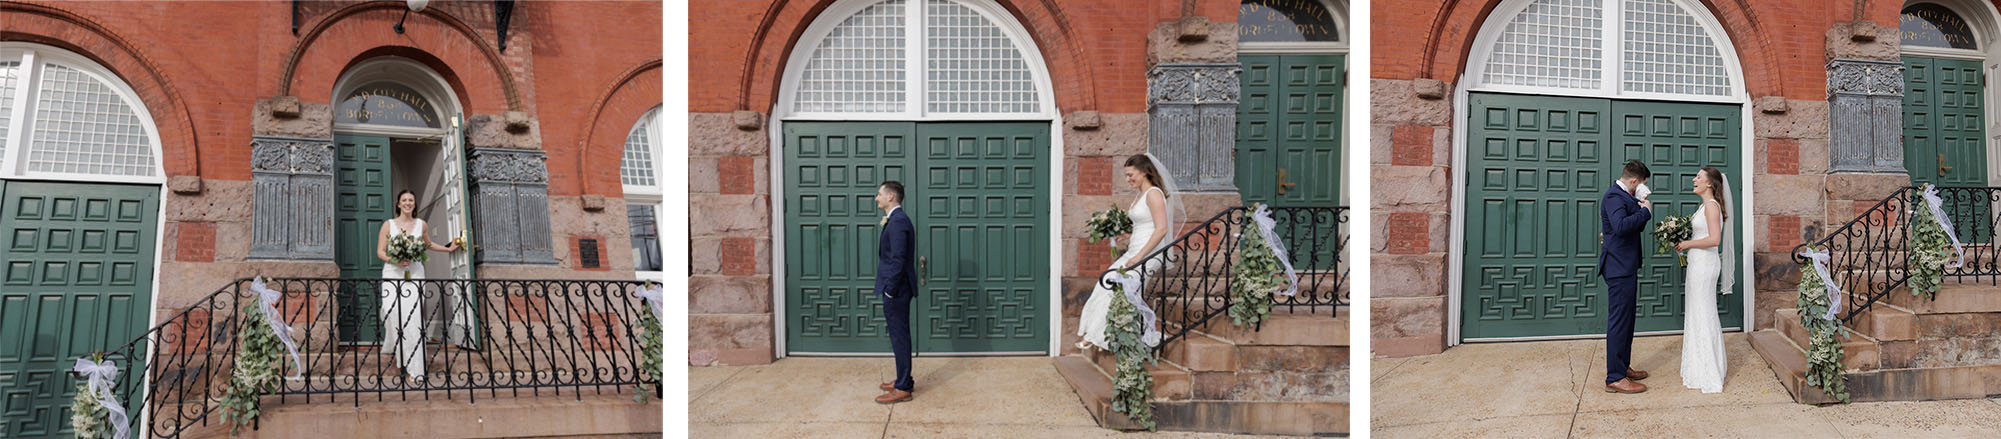 three photos of an elegant bride and groom during a first look in front of Old City Hall in Bordentown, NJ before their wedding ceremony